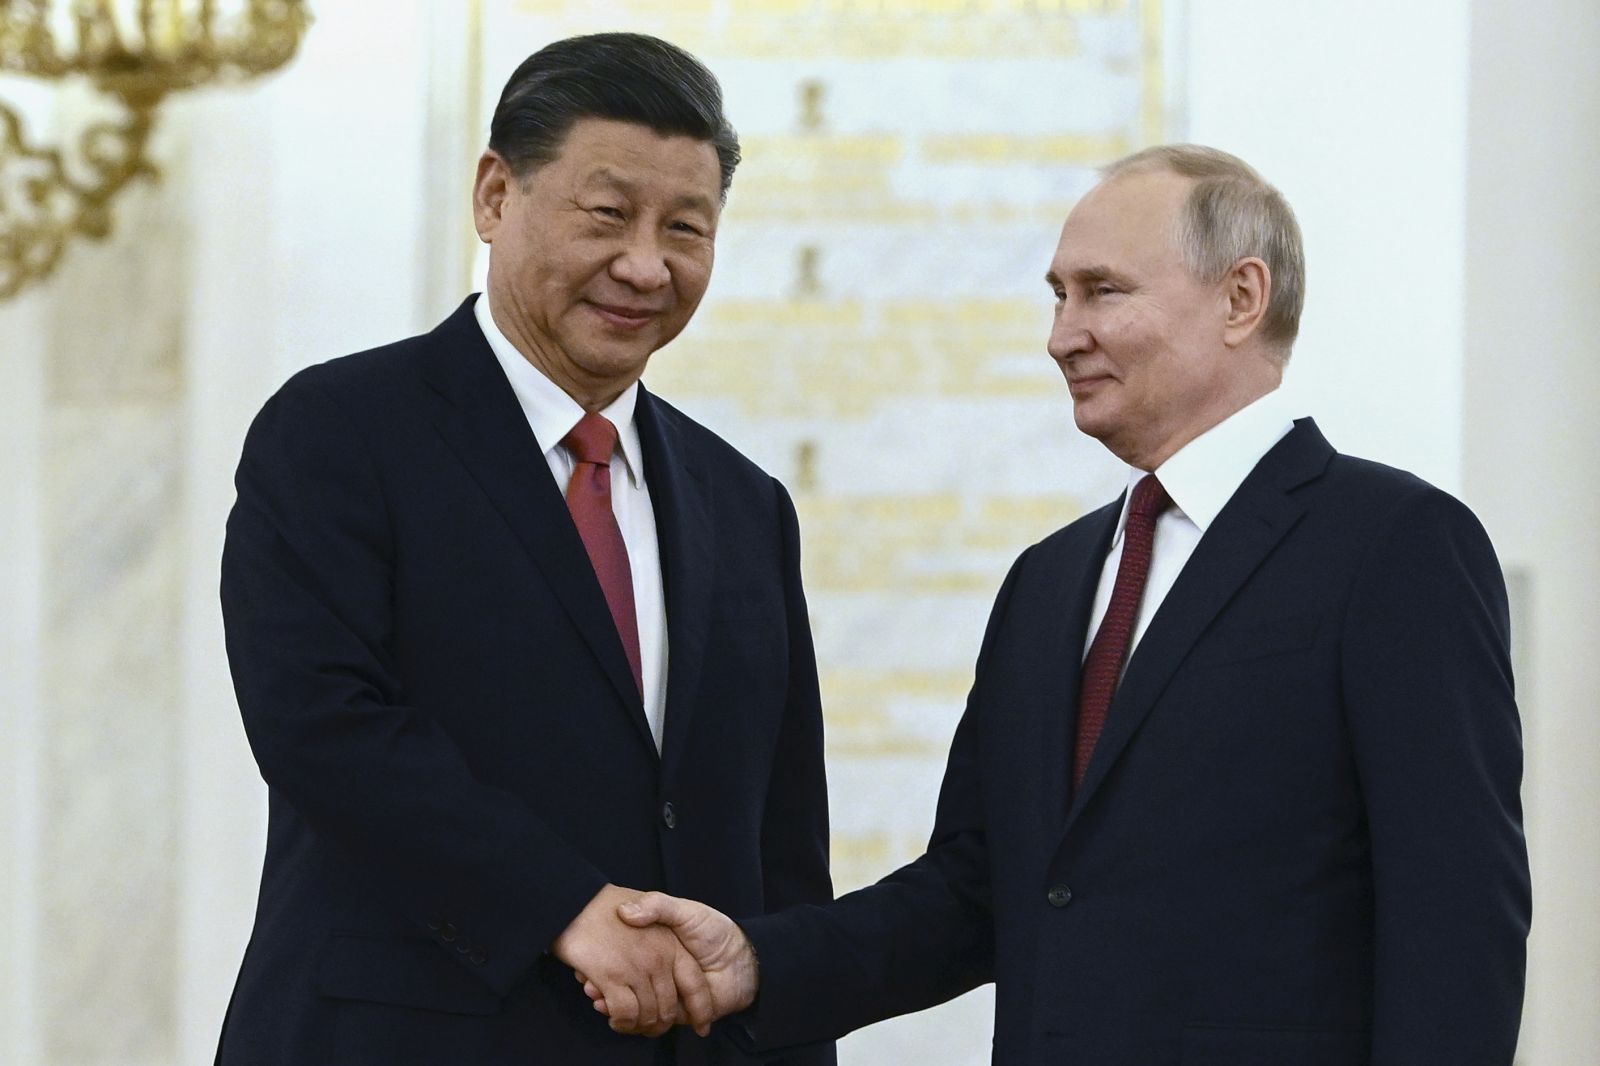 epa10535018 Chinese President Xi Jinping (L) shakes hands with Russian President Vladimir Putin (R) during a welcome ceremony before the Russia - China talks in narrow format at the Kremlin in Moscow, Russia, 21 March 2023. Chinese President Xi Jinping arrived in Moscow on a three-day visit, from March 20 to 22, according to Russian and Chinese state agencies. Xi Jinping visits Russia on improving joint partnerships and developing key areas of Russian-Chinese economic cooperation.  EPA/ALEXEY MAYSHEV / SPUTNIK / KREMLIN POOL MANDATORY CREDIT